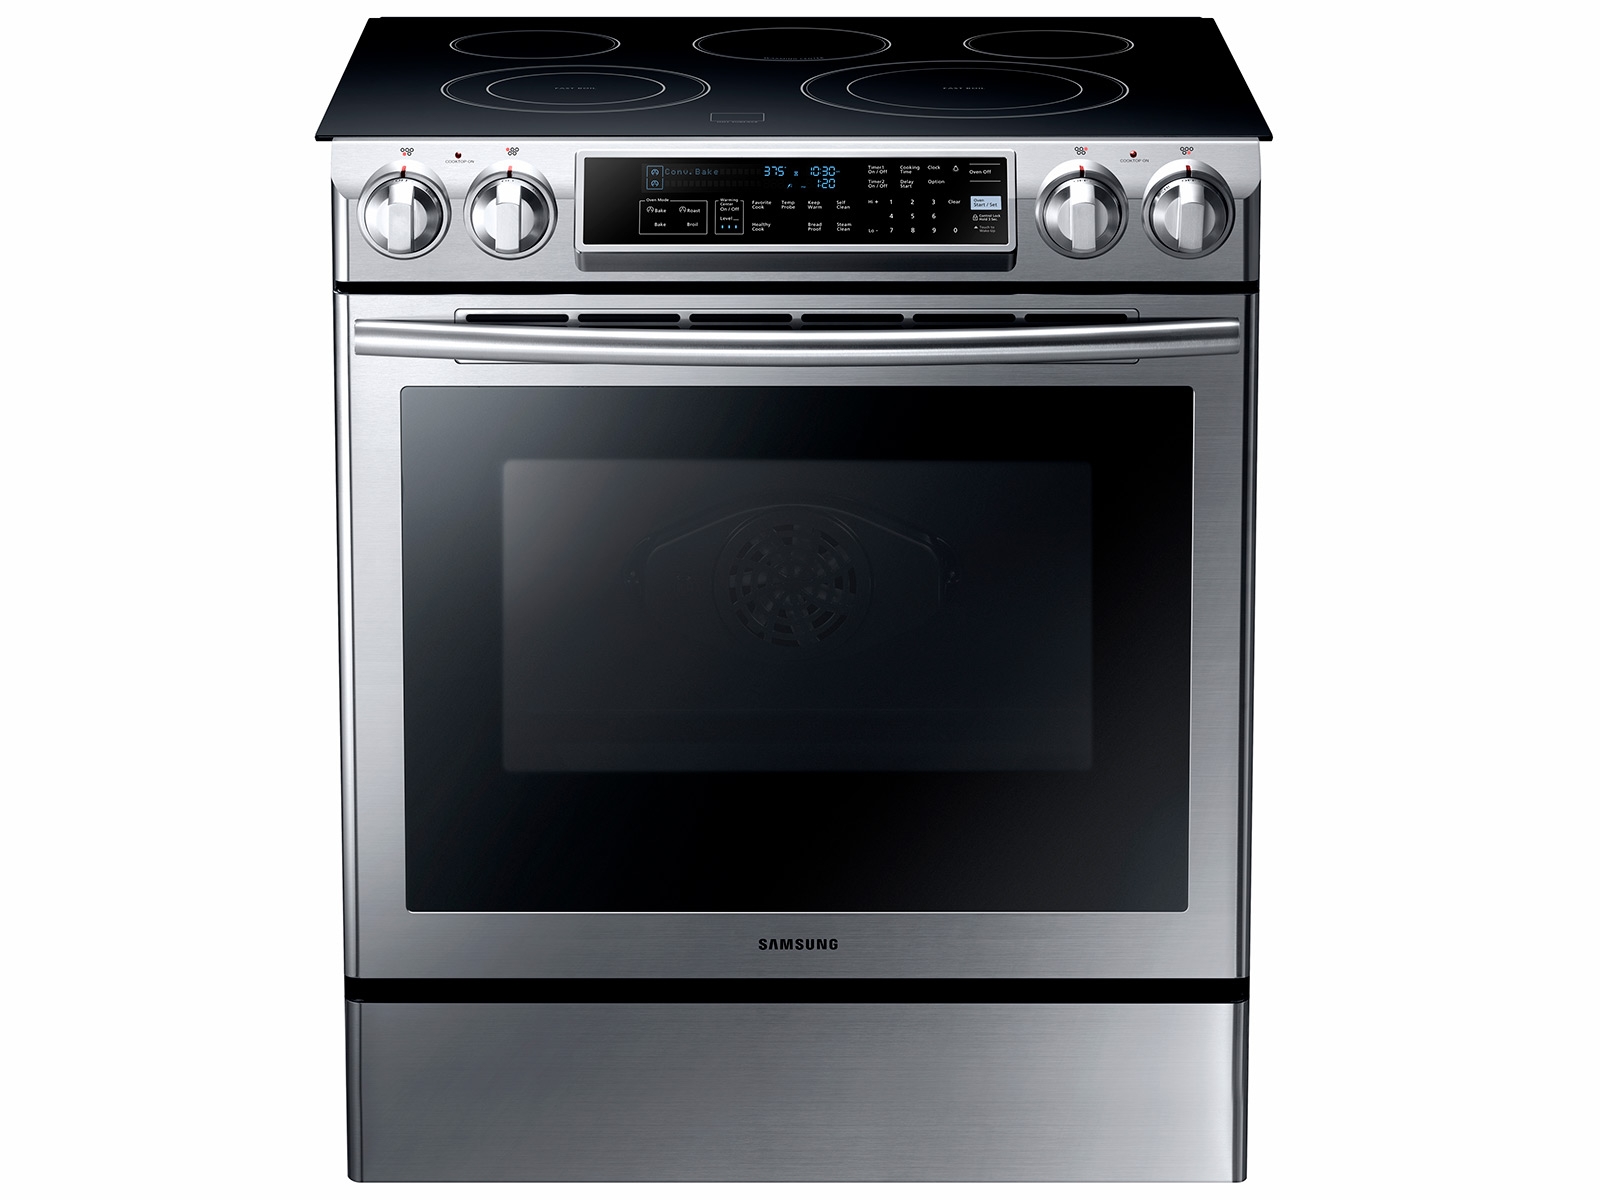 Electrolux Vs Samsung Slide In Gas Ranges Reviews Ratings Prices